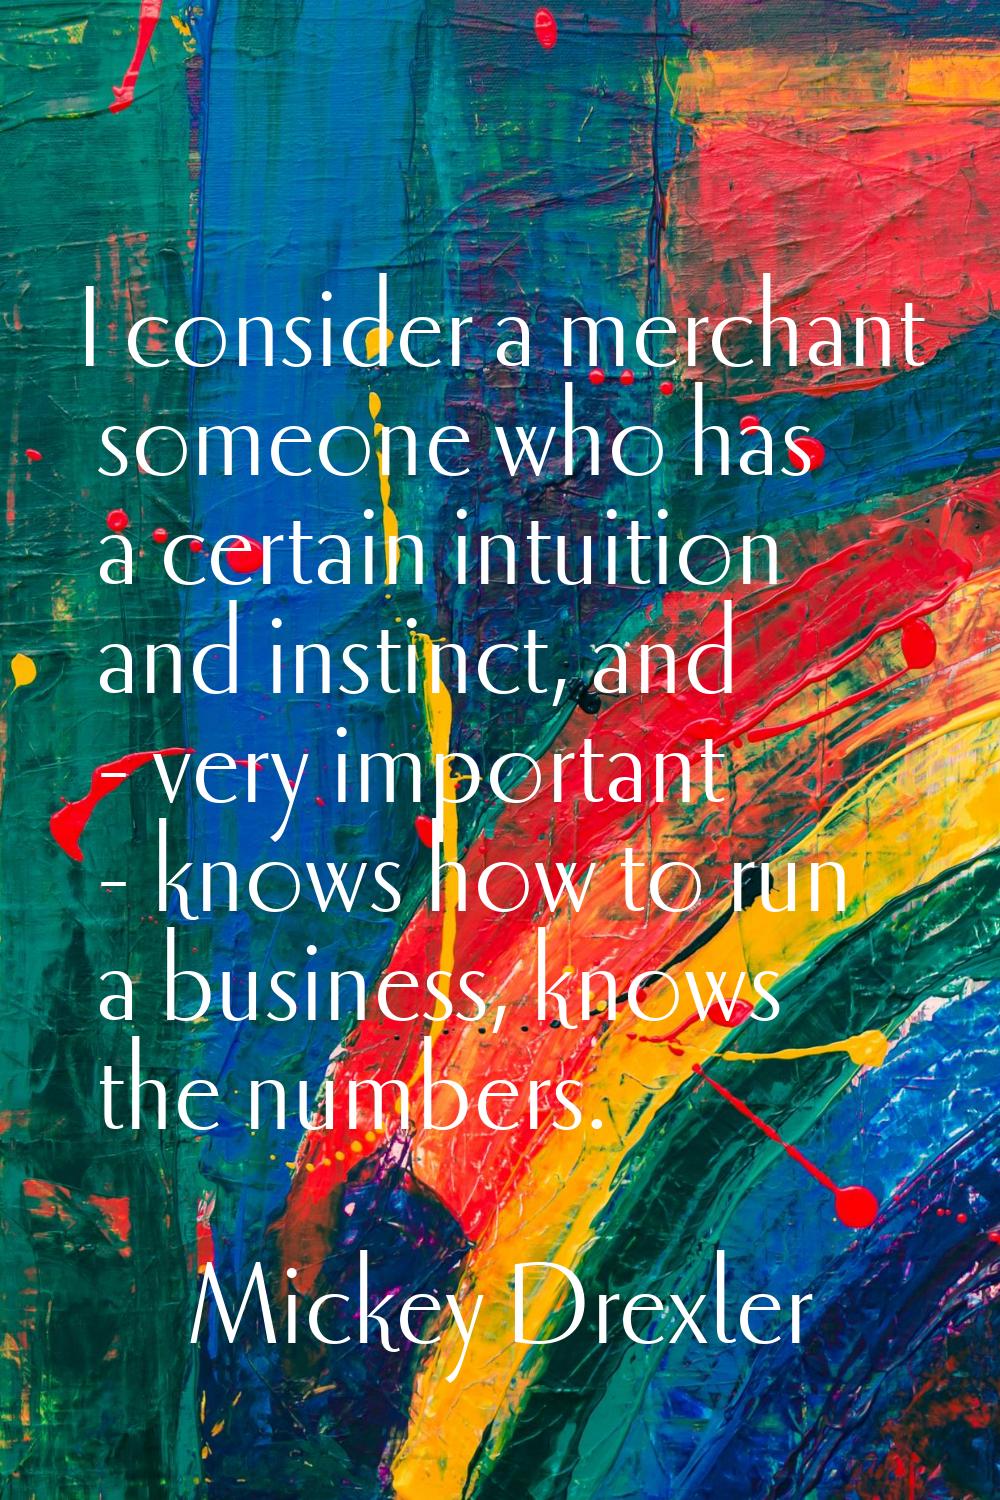 I consider a merchant someone who has a certain intuition and instinct, and - very important - know